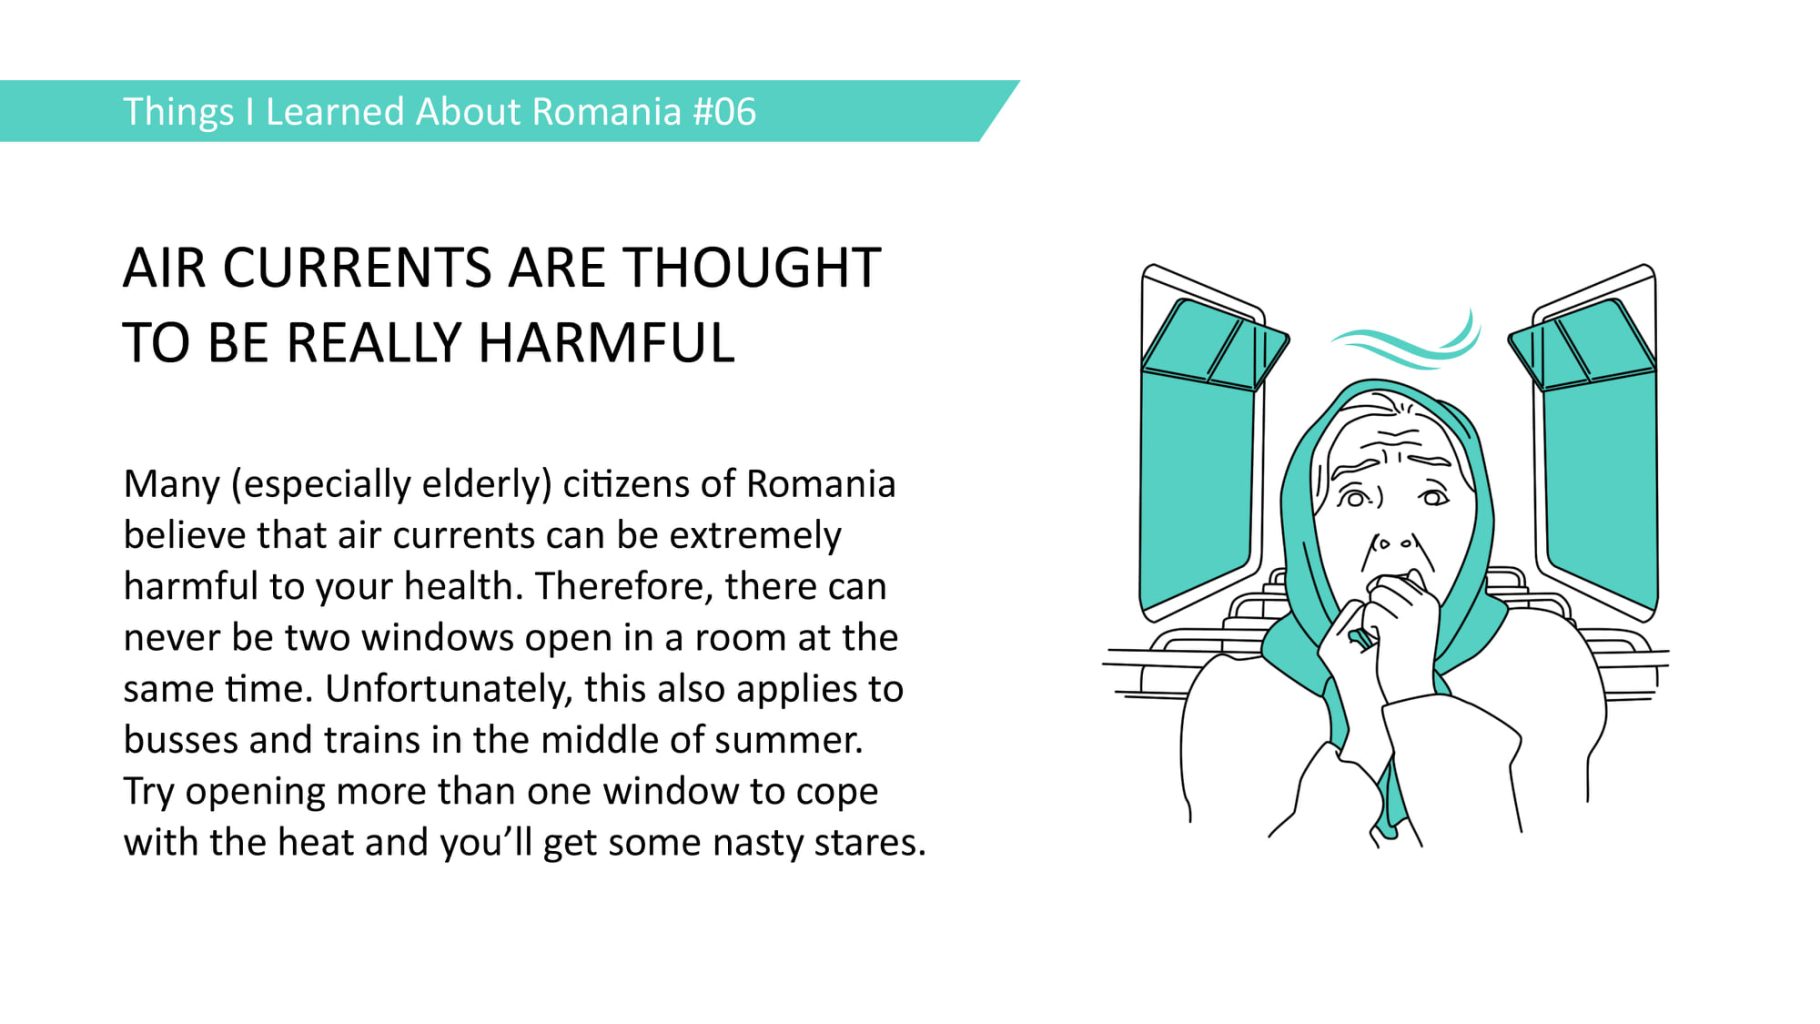 Many (especially elderly) citizens of Romania believe that air currents can be extremely harmful to your health. Therefore, there can never be two windows open in a room at the same time. Unfortunately, this also applies to busses and trains in the middle of summer. Try opening more than one window to cope with the heat and you'll get some nasty stares.